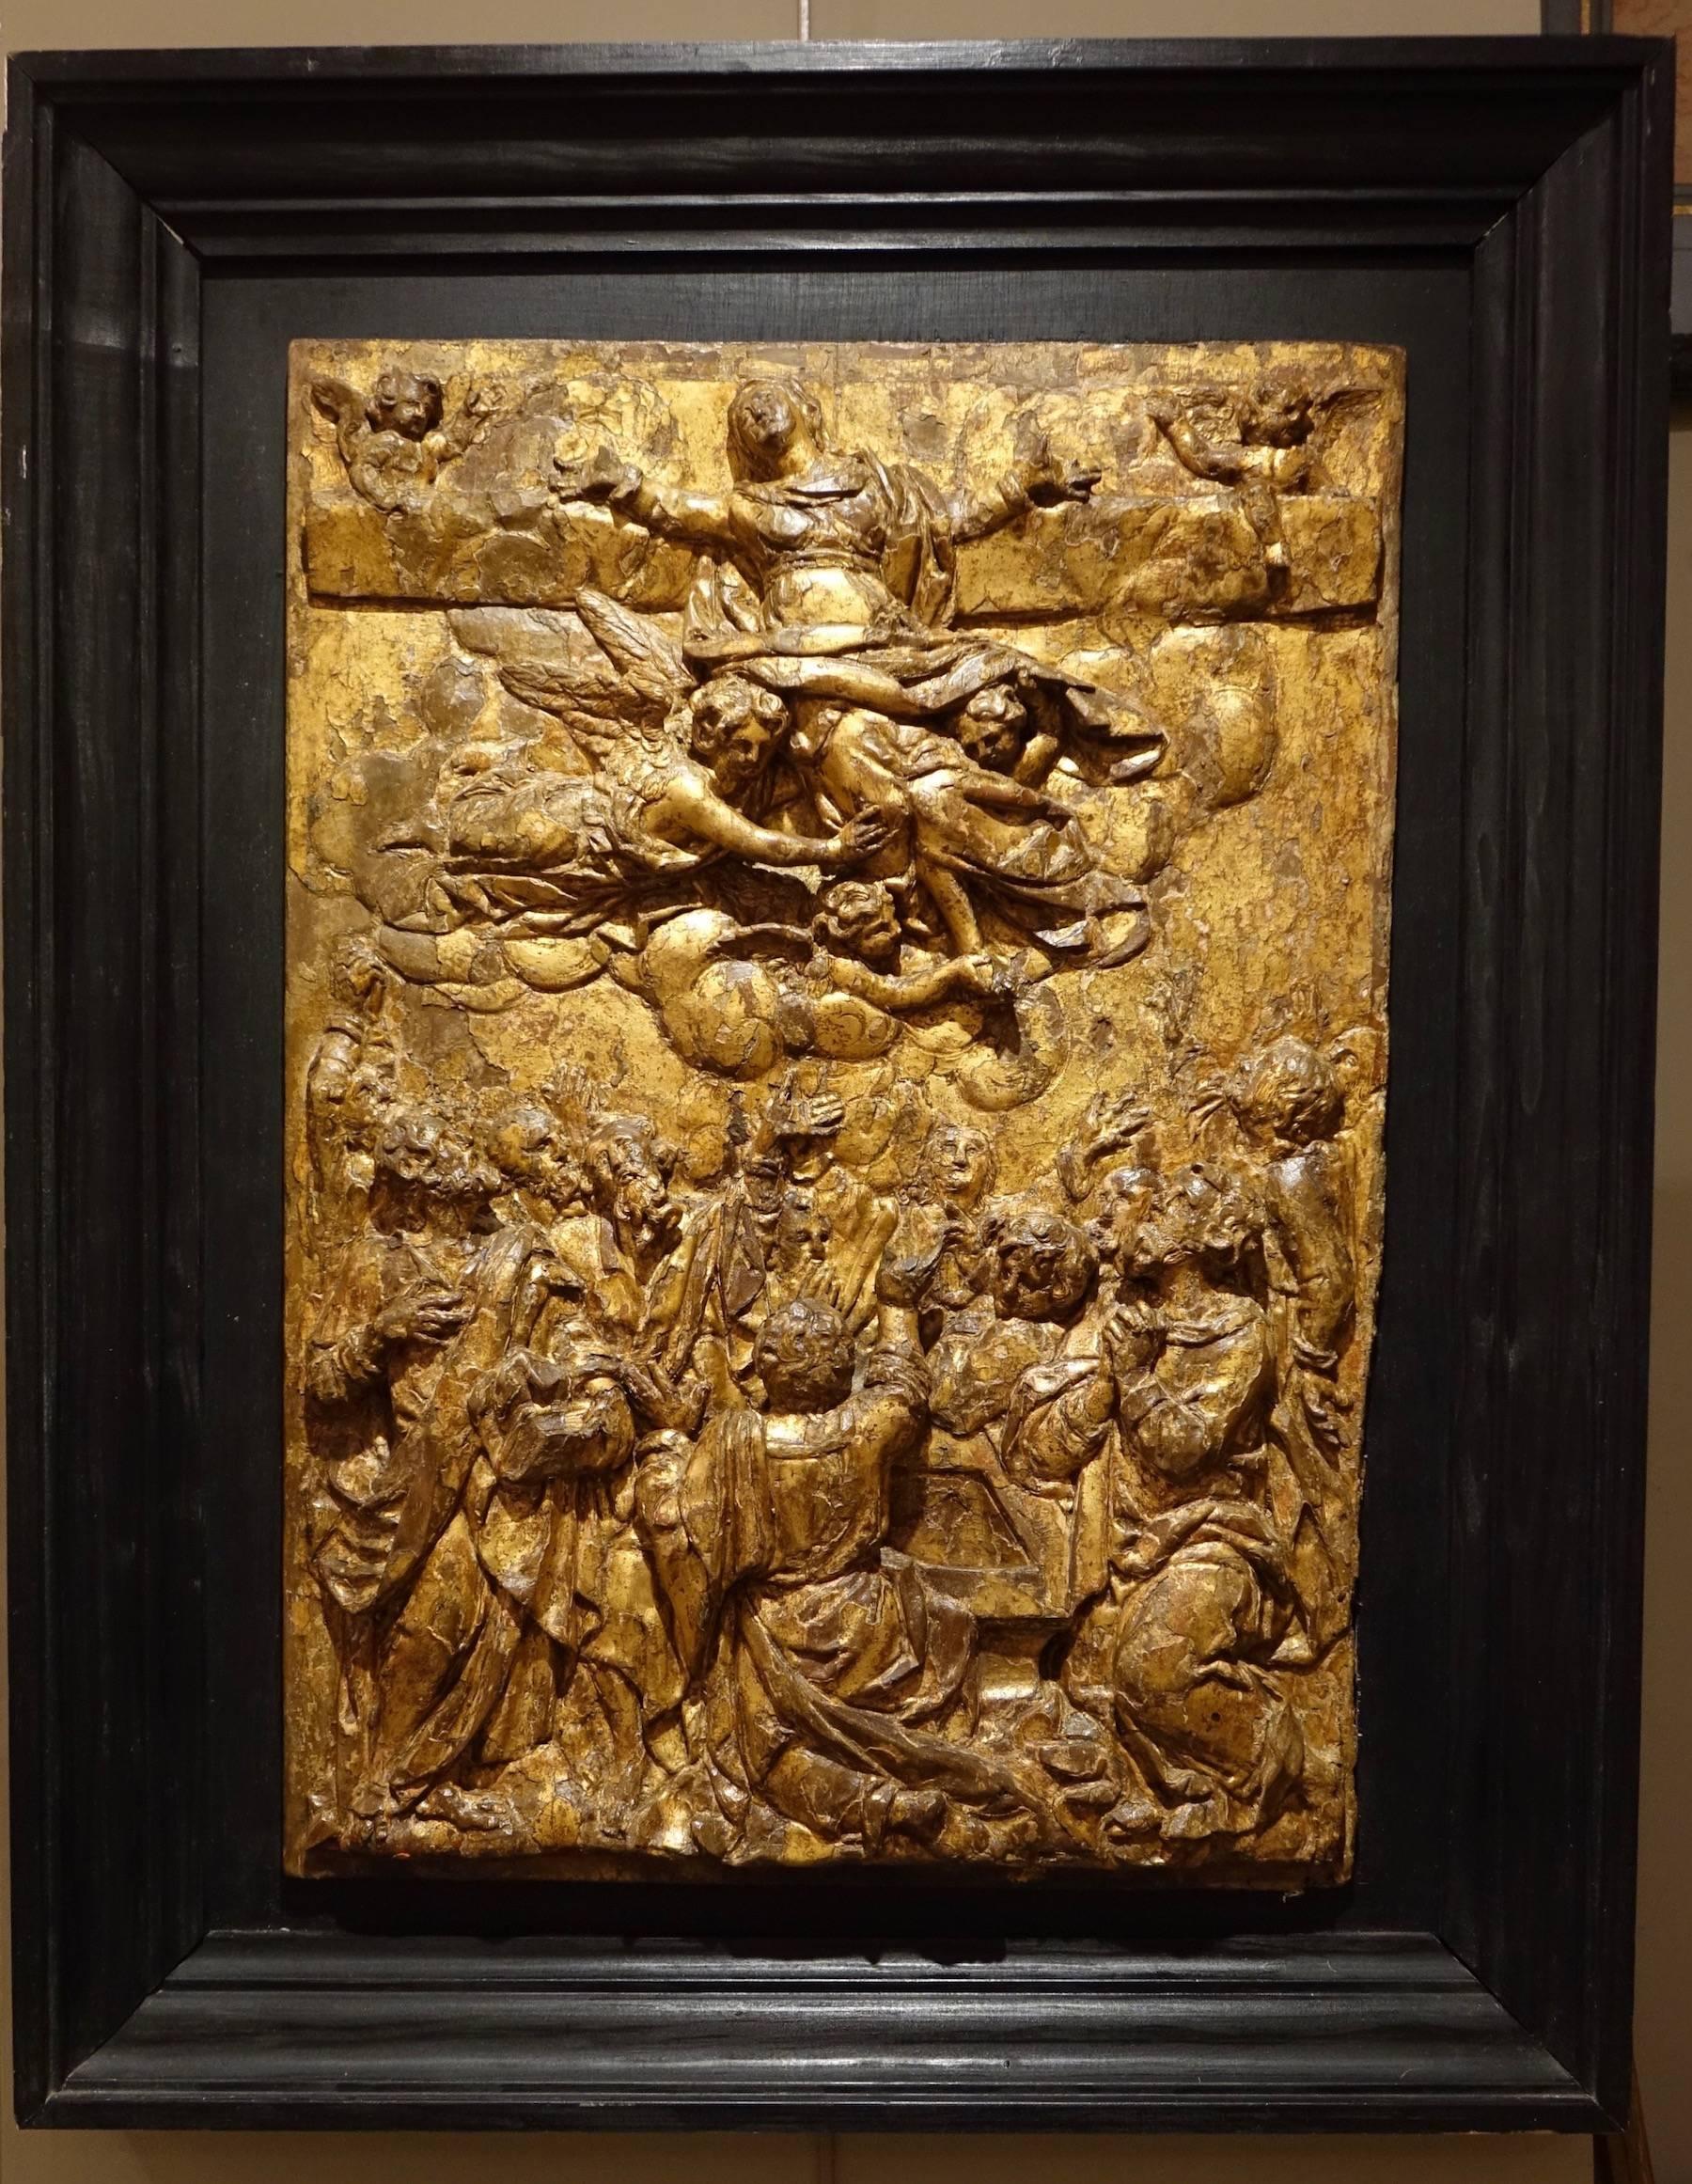 Pair of carved oak , gold leaf gilded panels, Flanders or north of France, late 16th century.
Blackened wood frames later period.
One represents the ascension of Christ (elevation?) with the Virgin and the Apostles. The other is the elevation of